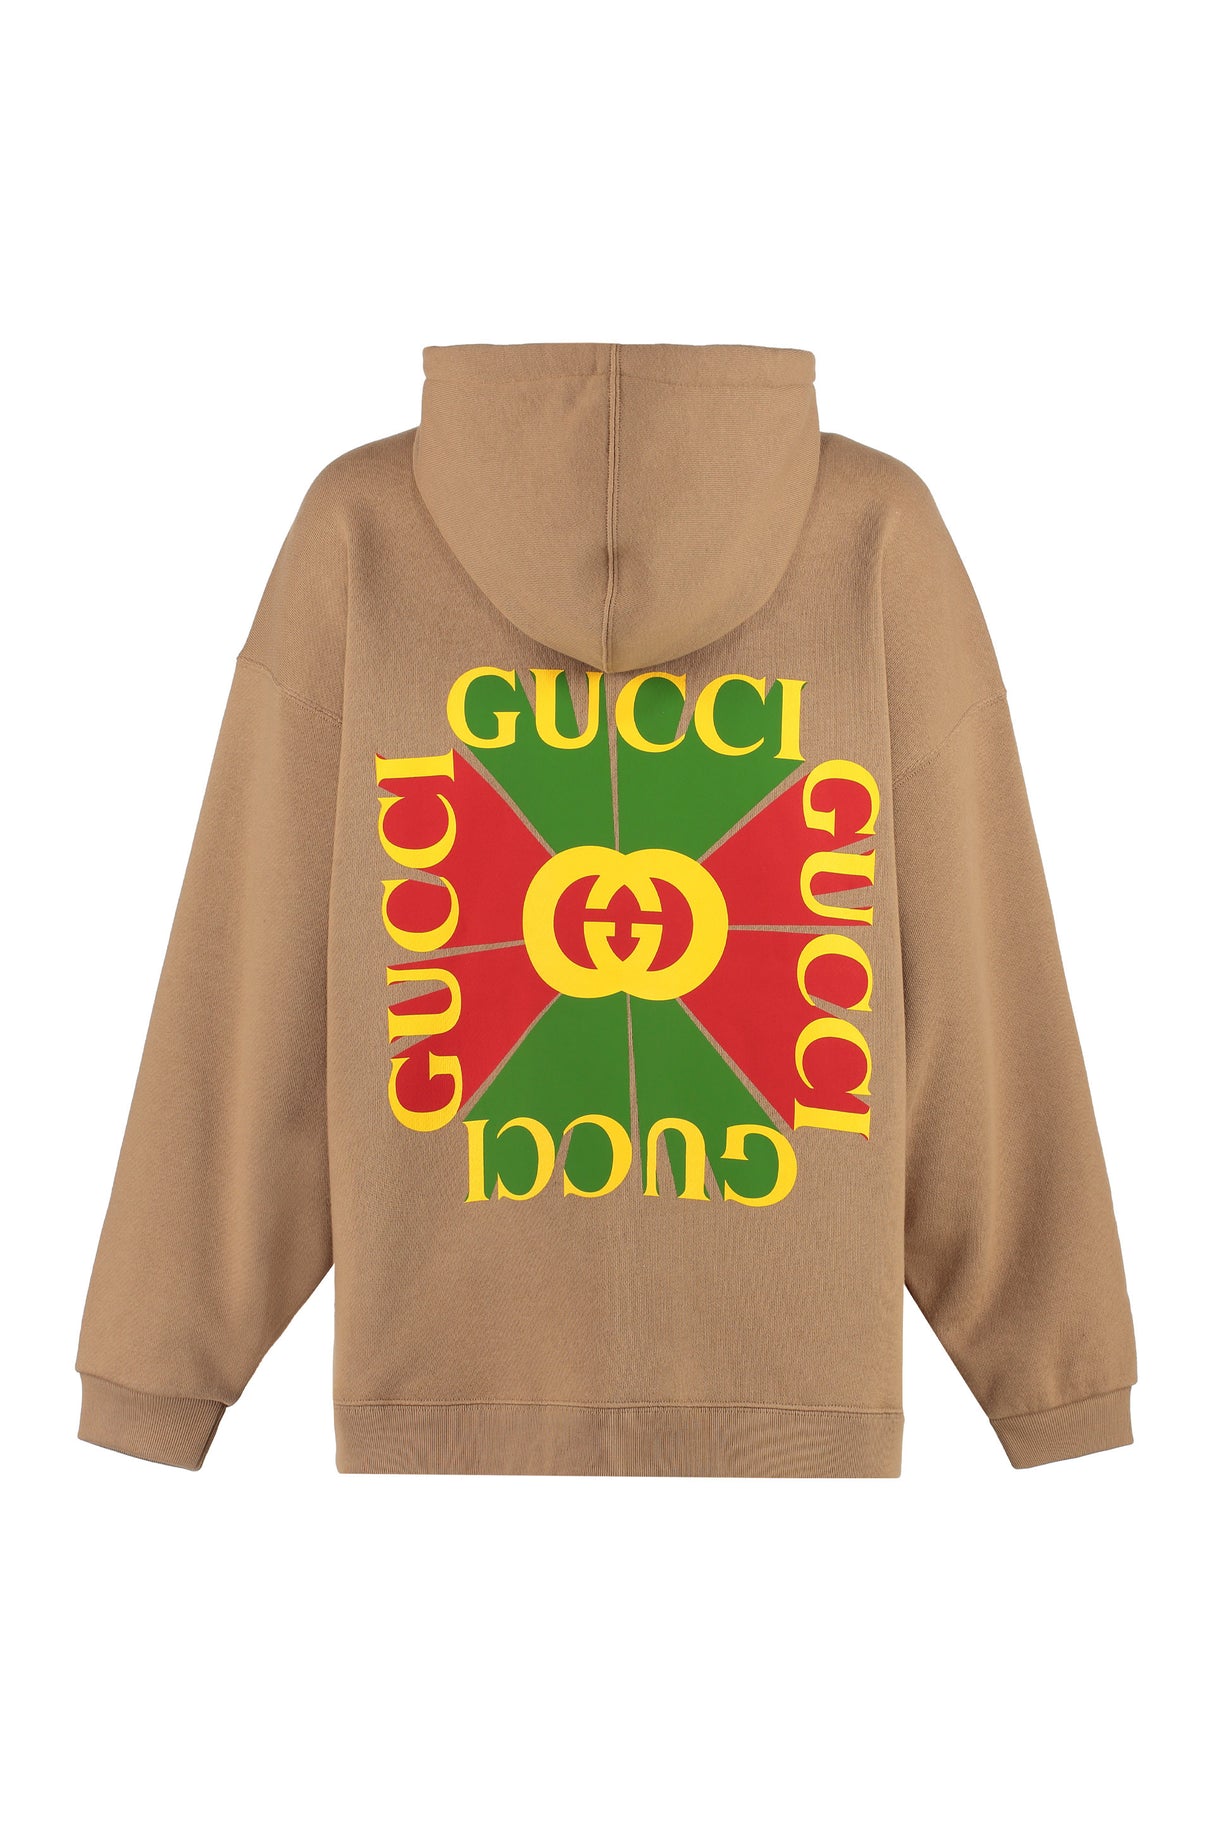 GUCCI Vintage Back Print Cotton Hoodie for Women in Camel